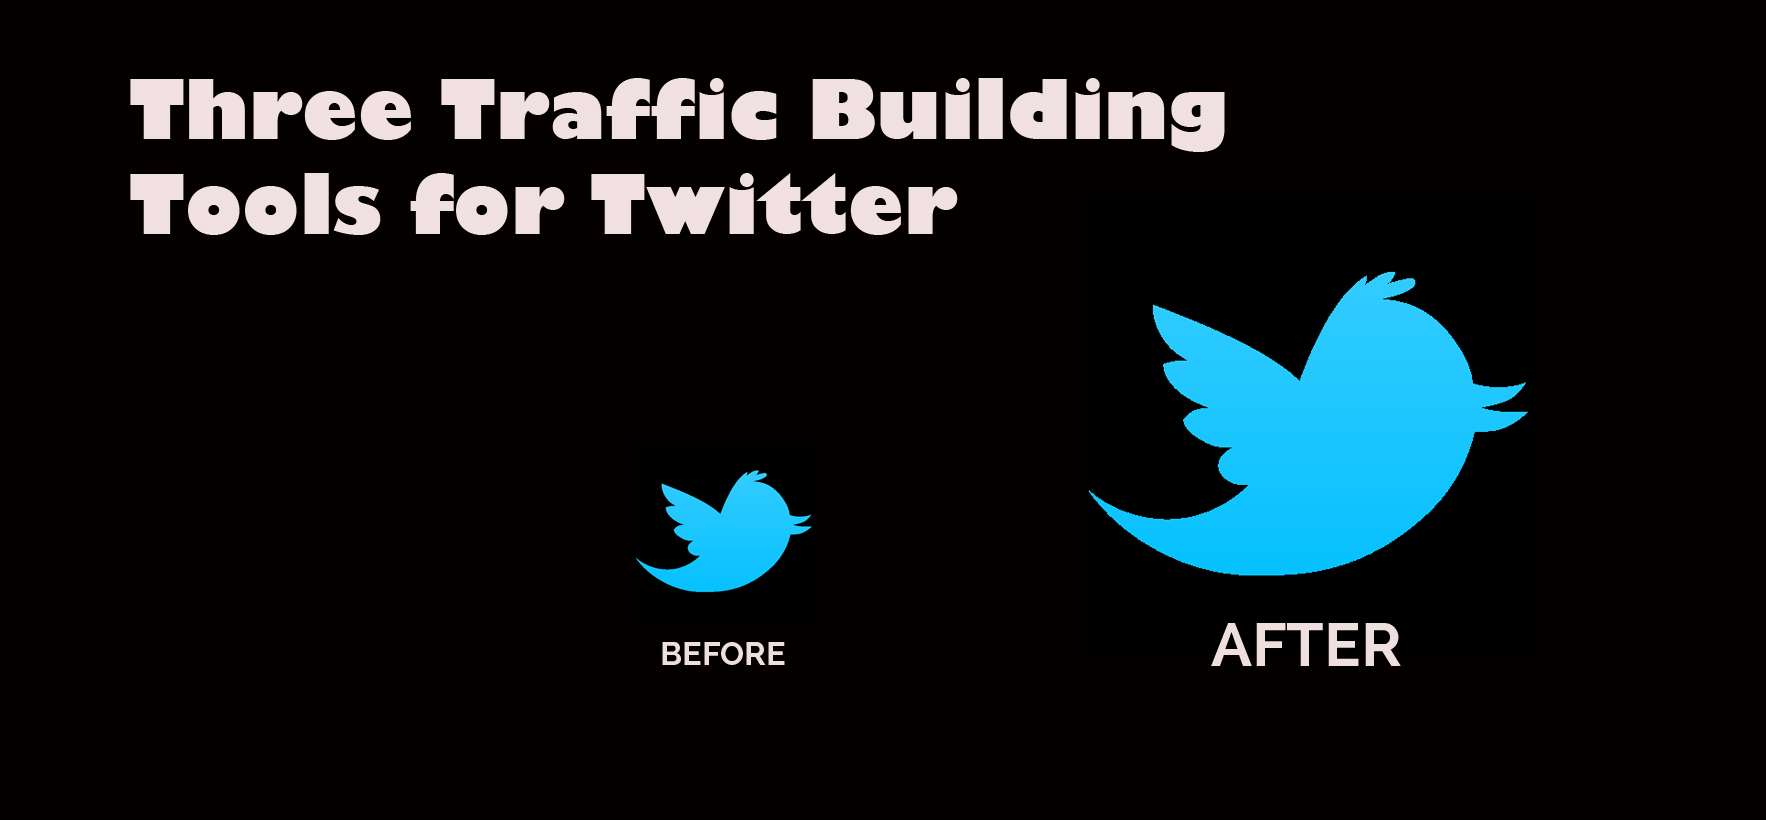 3 Traffic Building Tools for Twitter